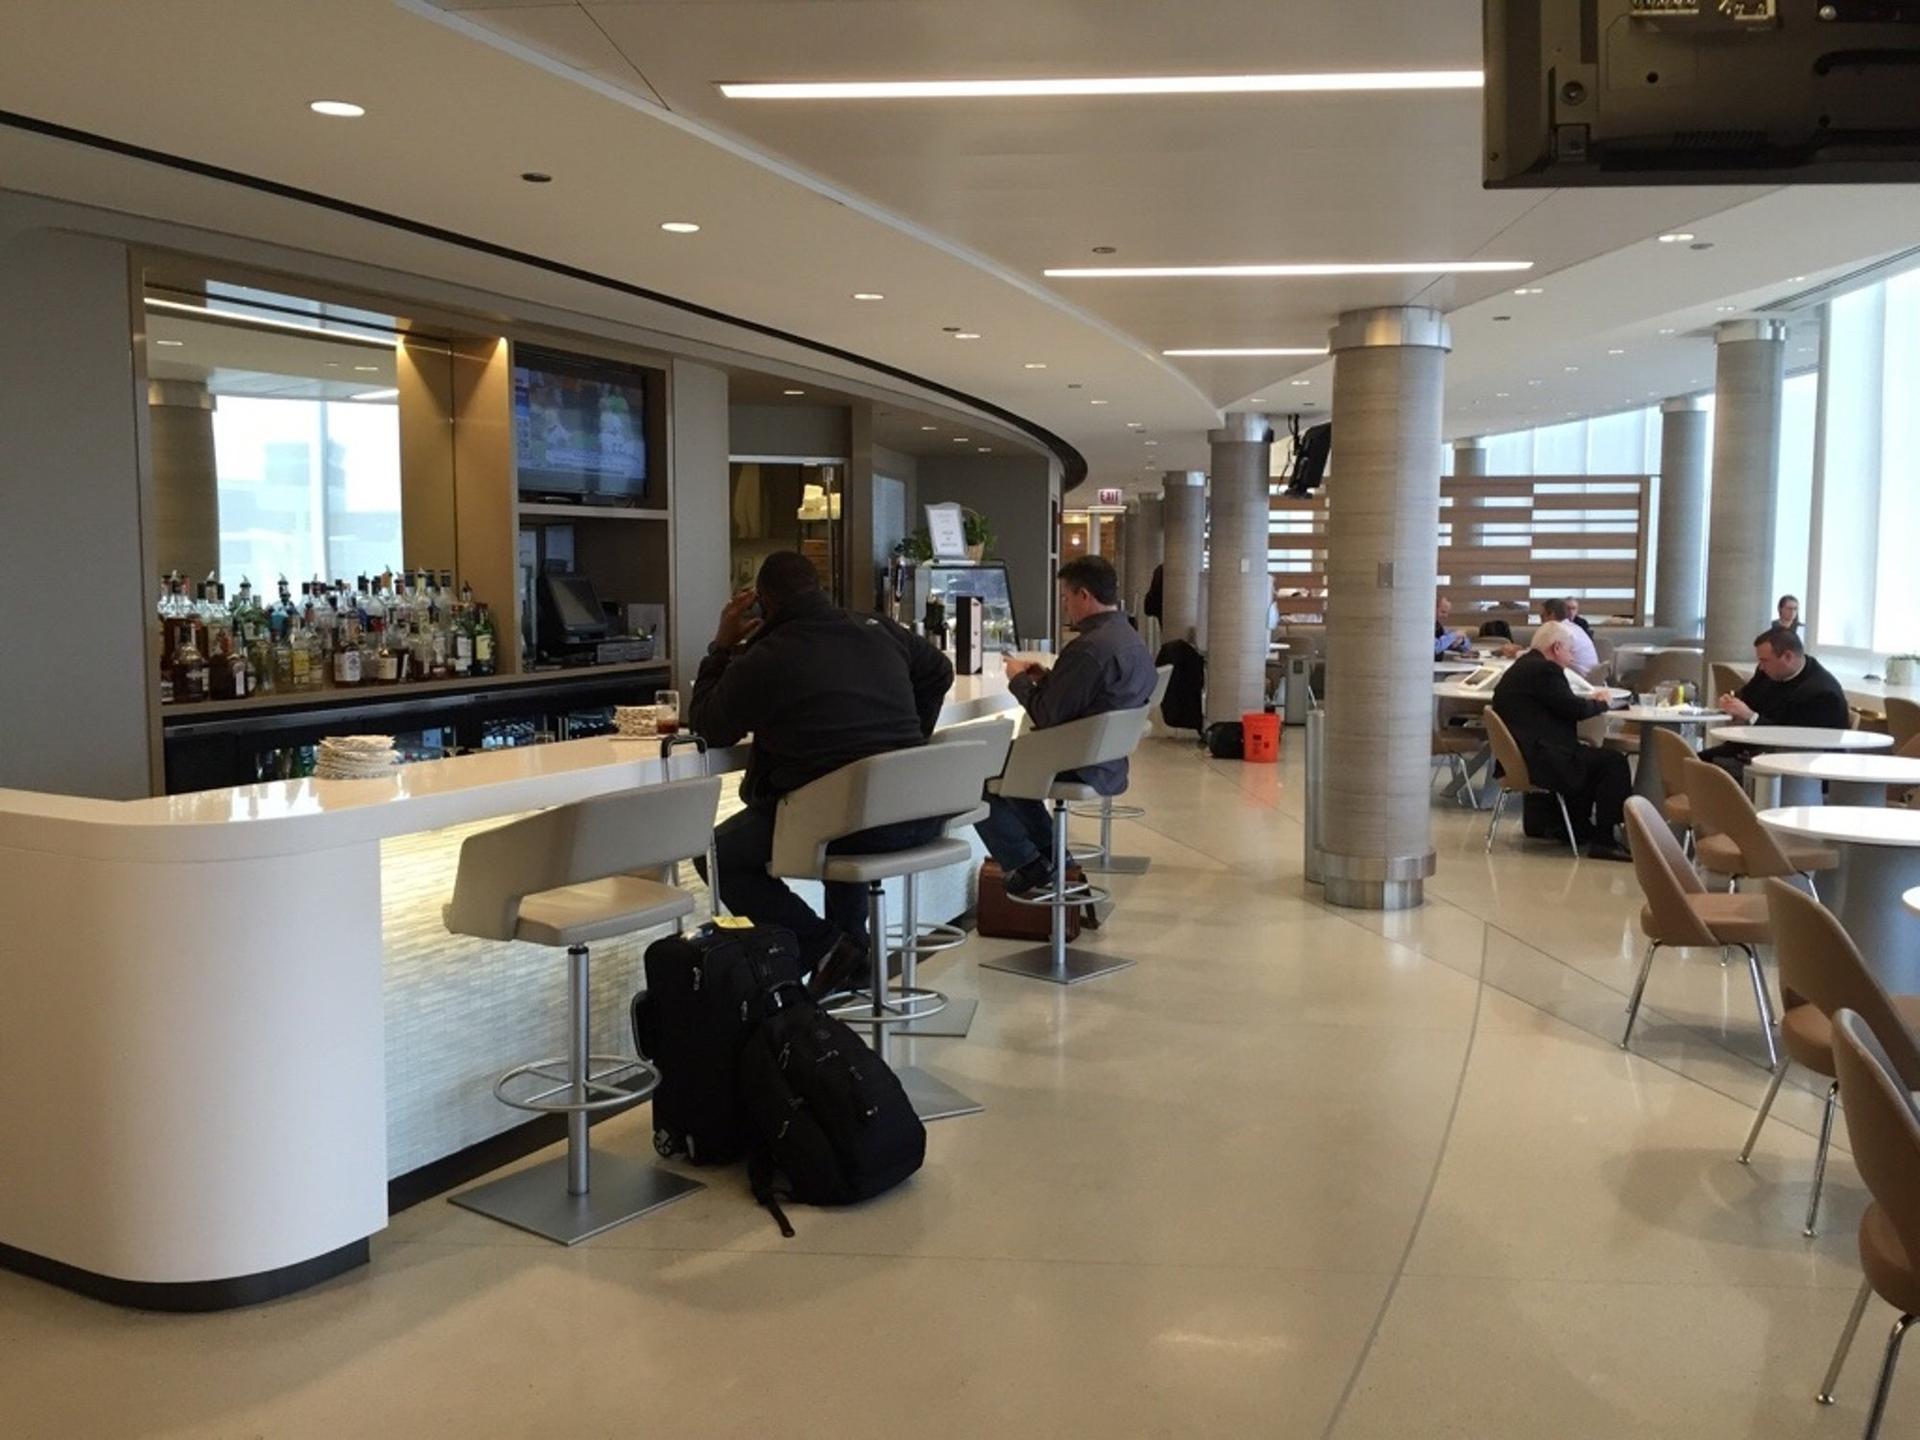 American Airlines Admirals Club image 50 of 50